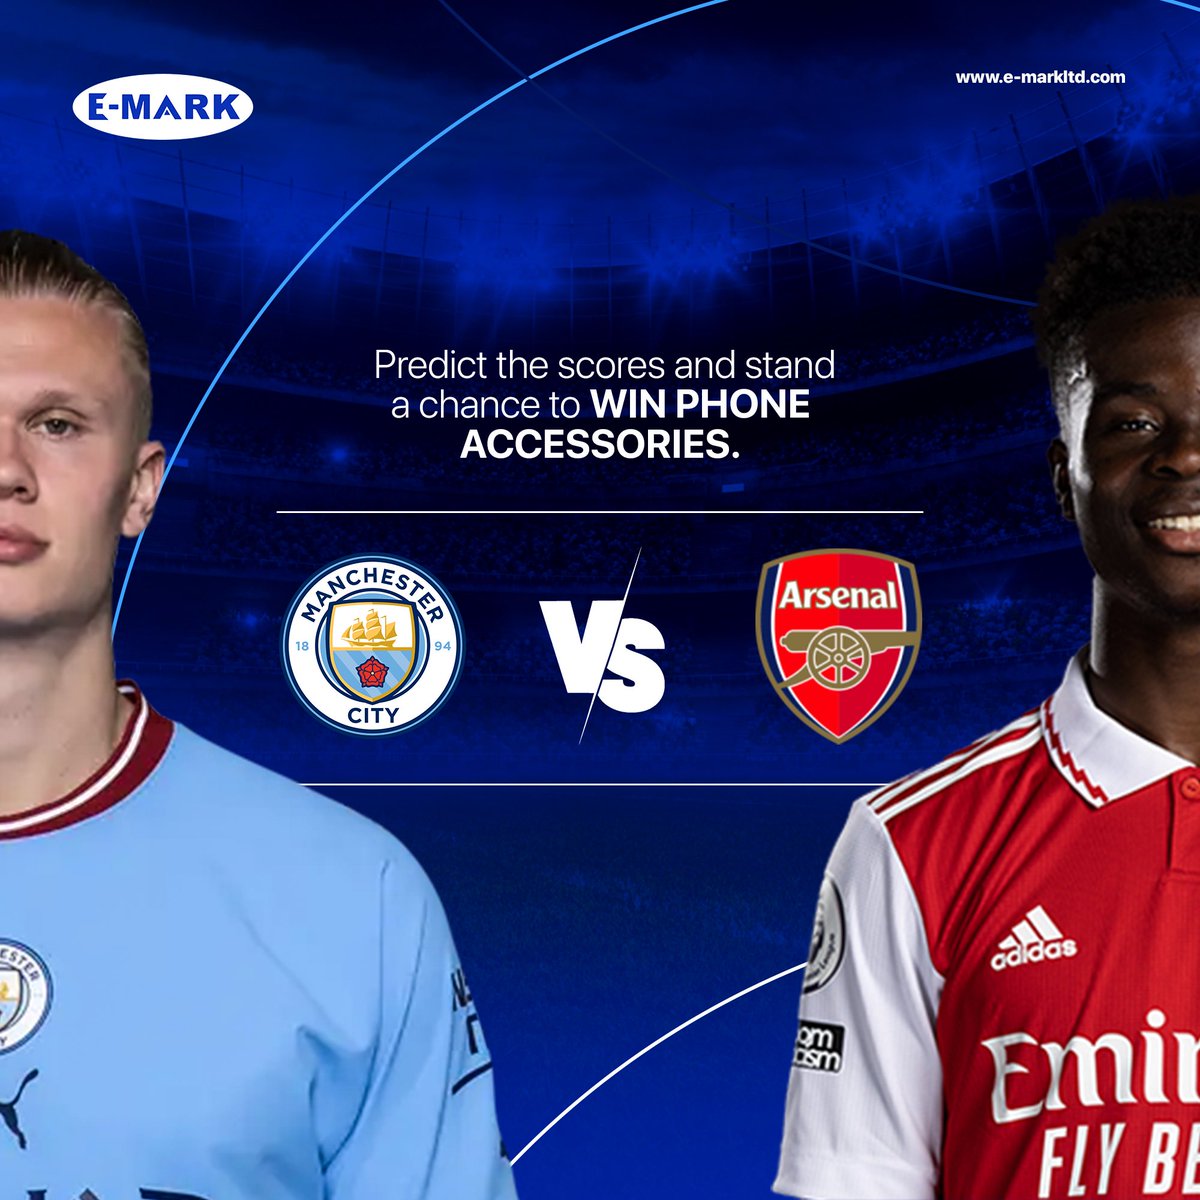 Stand a Chance to Win Phone accessories By Predicting the correct scores!

#EnjoytheGame
#ArsenalVsManchesterCity
#ConnectingPeople